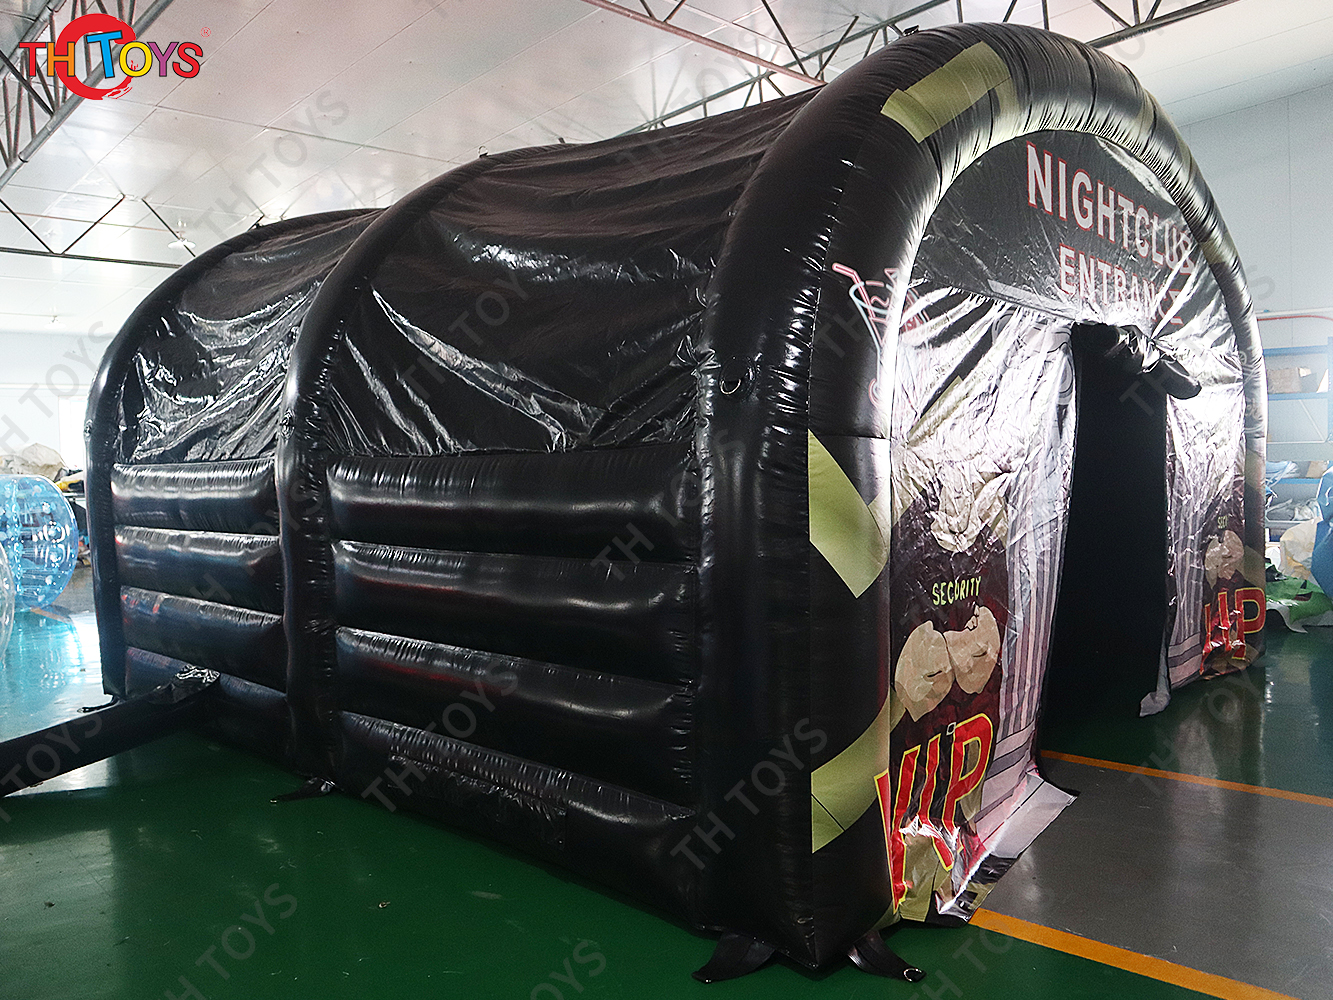 Party Marquee black inflatable nightclub commercial PVC inflatable night club tent